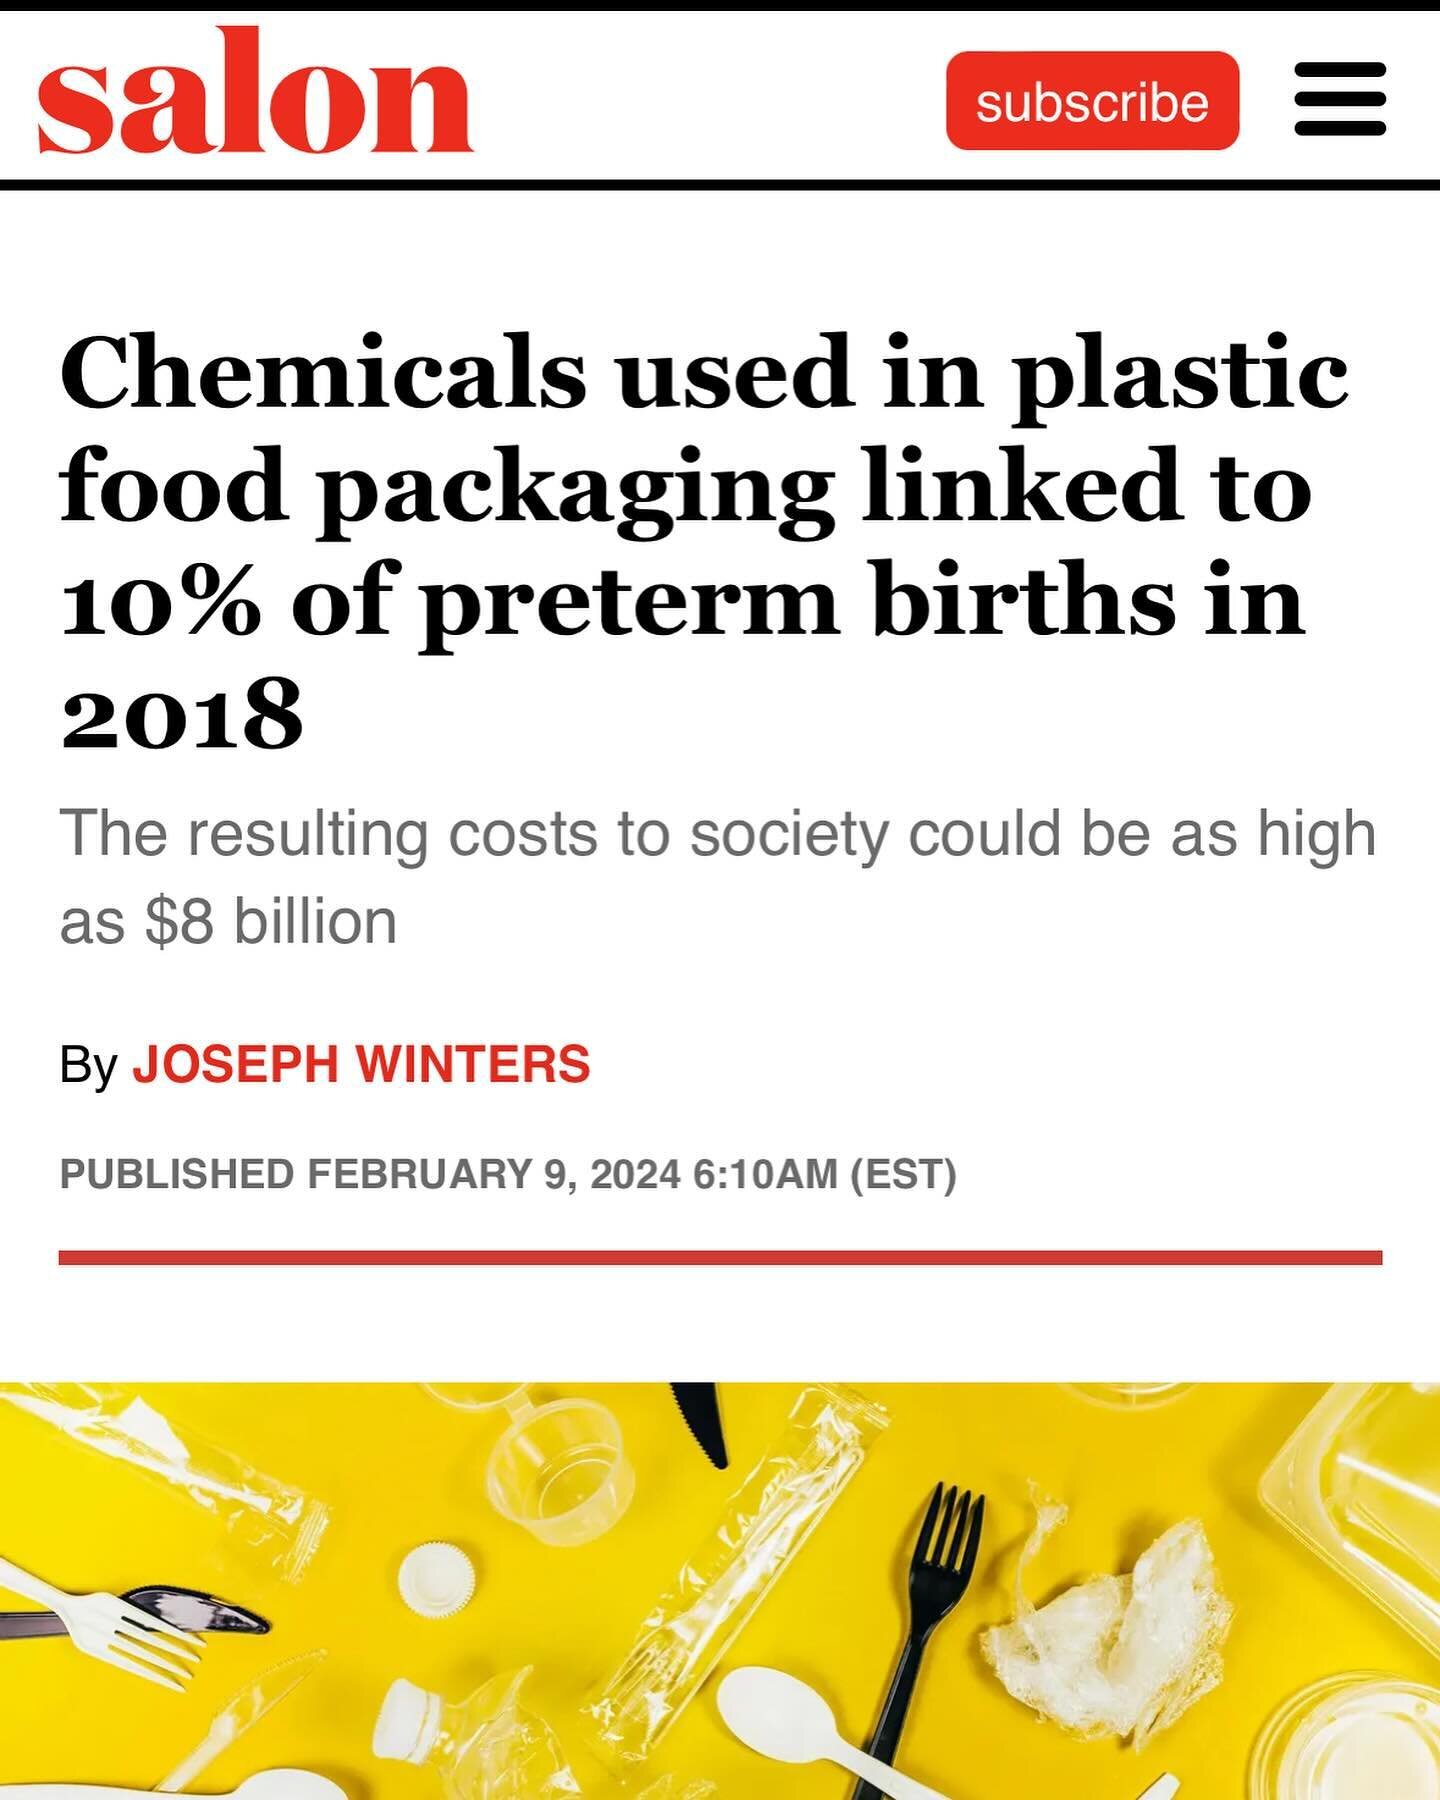 Phthalate exposure is just one way the plastics industry externalizes harms. Its products are of course made from fossil fuels, and making them release billions of tons of greenhouse gas every year &mdash; not to mention toxic air and water emissions